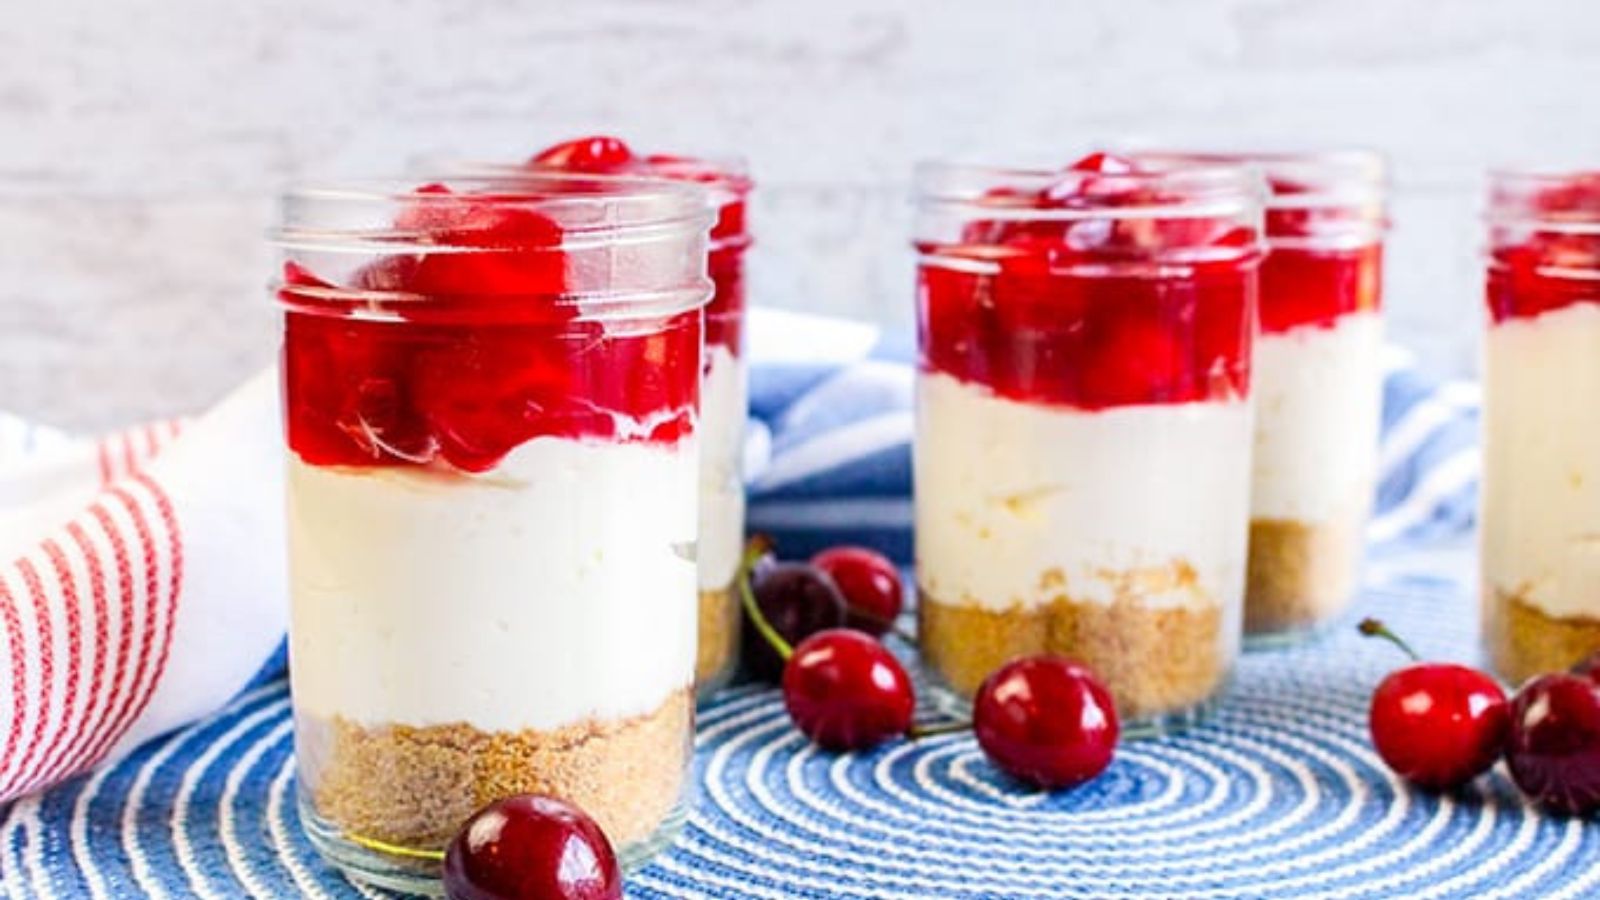 These 18 No-Bake Dessert Recipes That Will Revolutionize Your Kitchen Experience